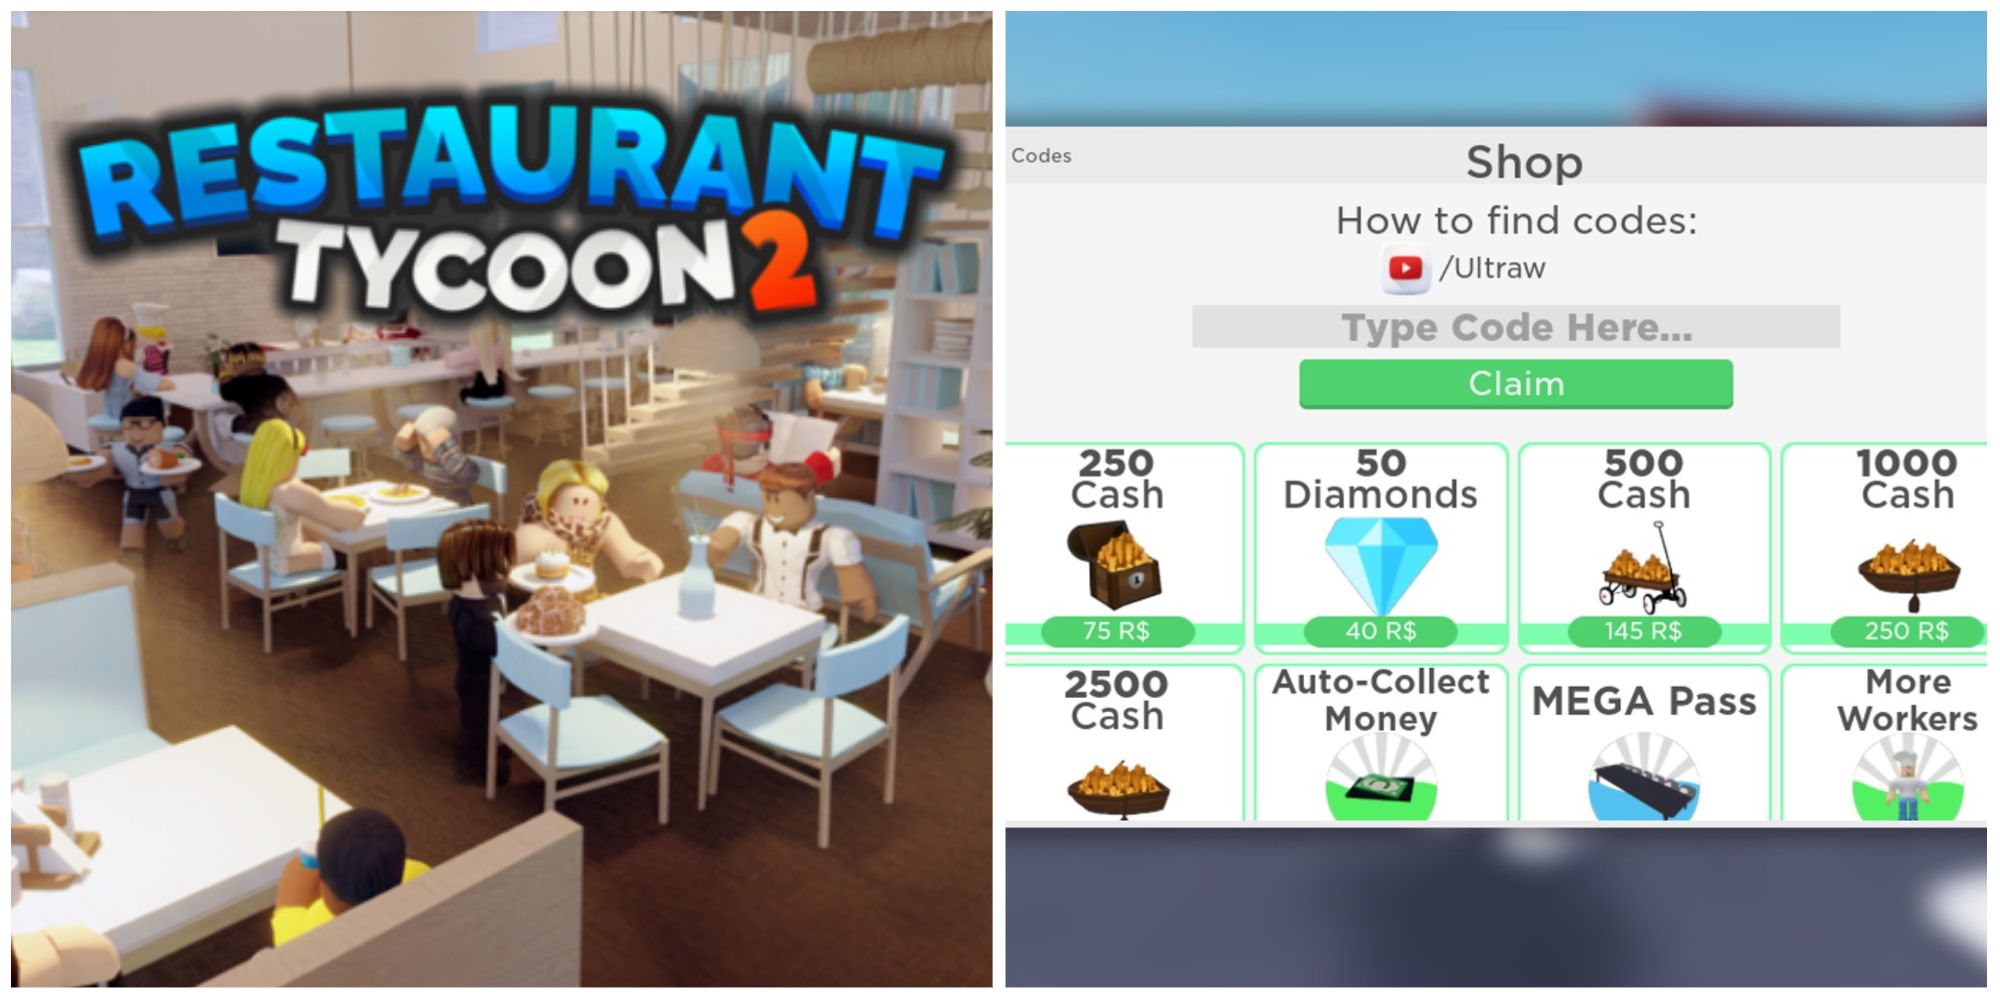 Restaurant Tycoon 2 Codes For August 2022 - Roblox